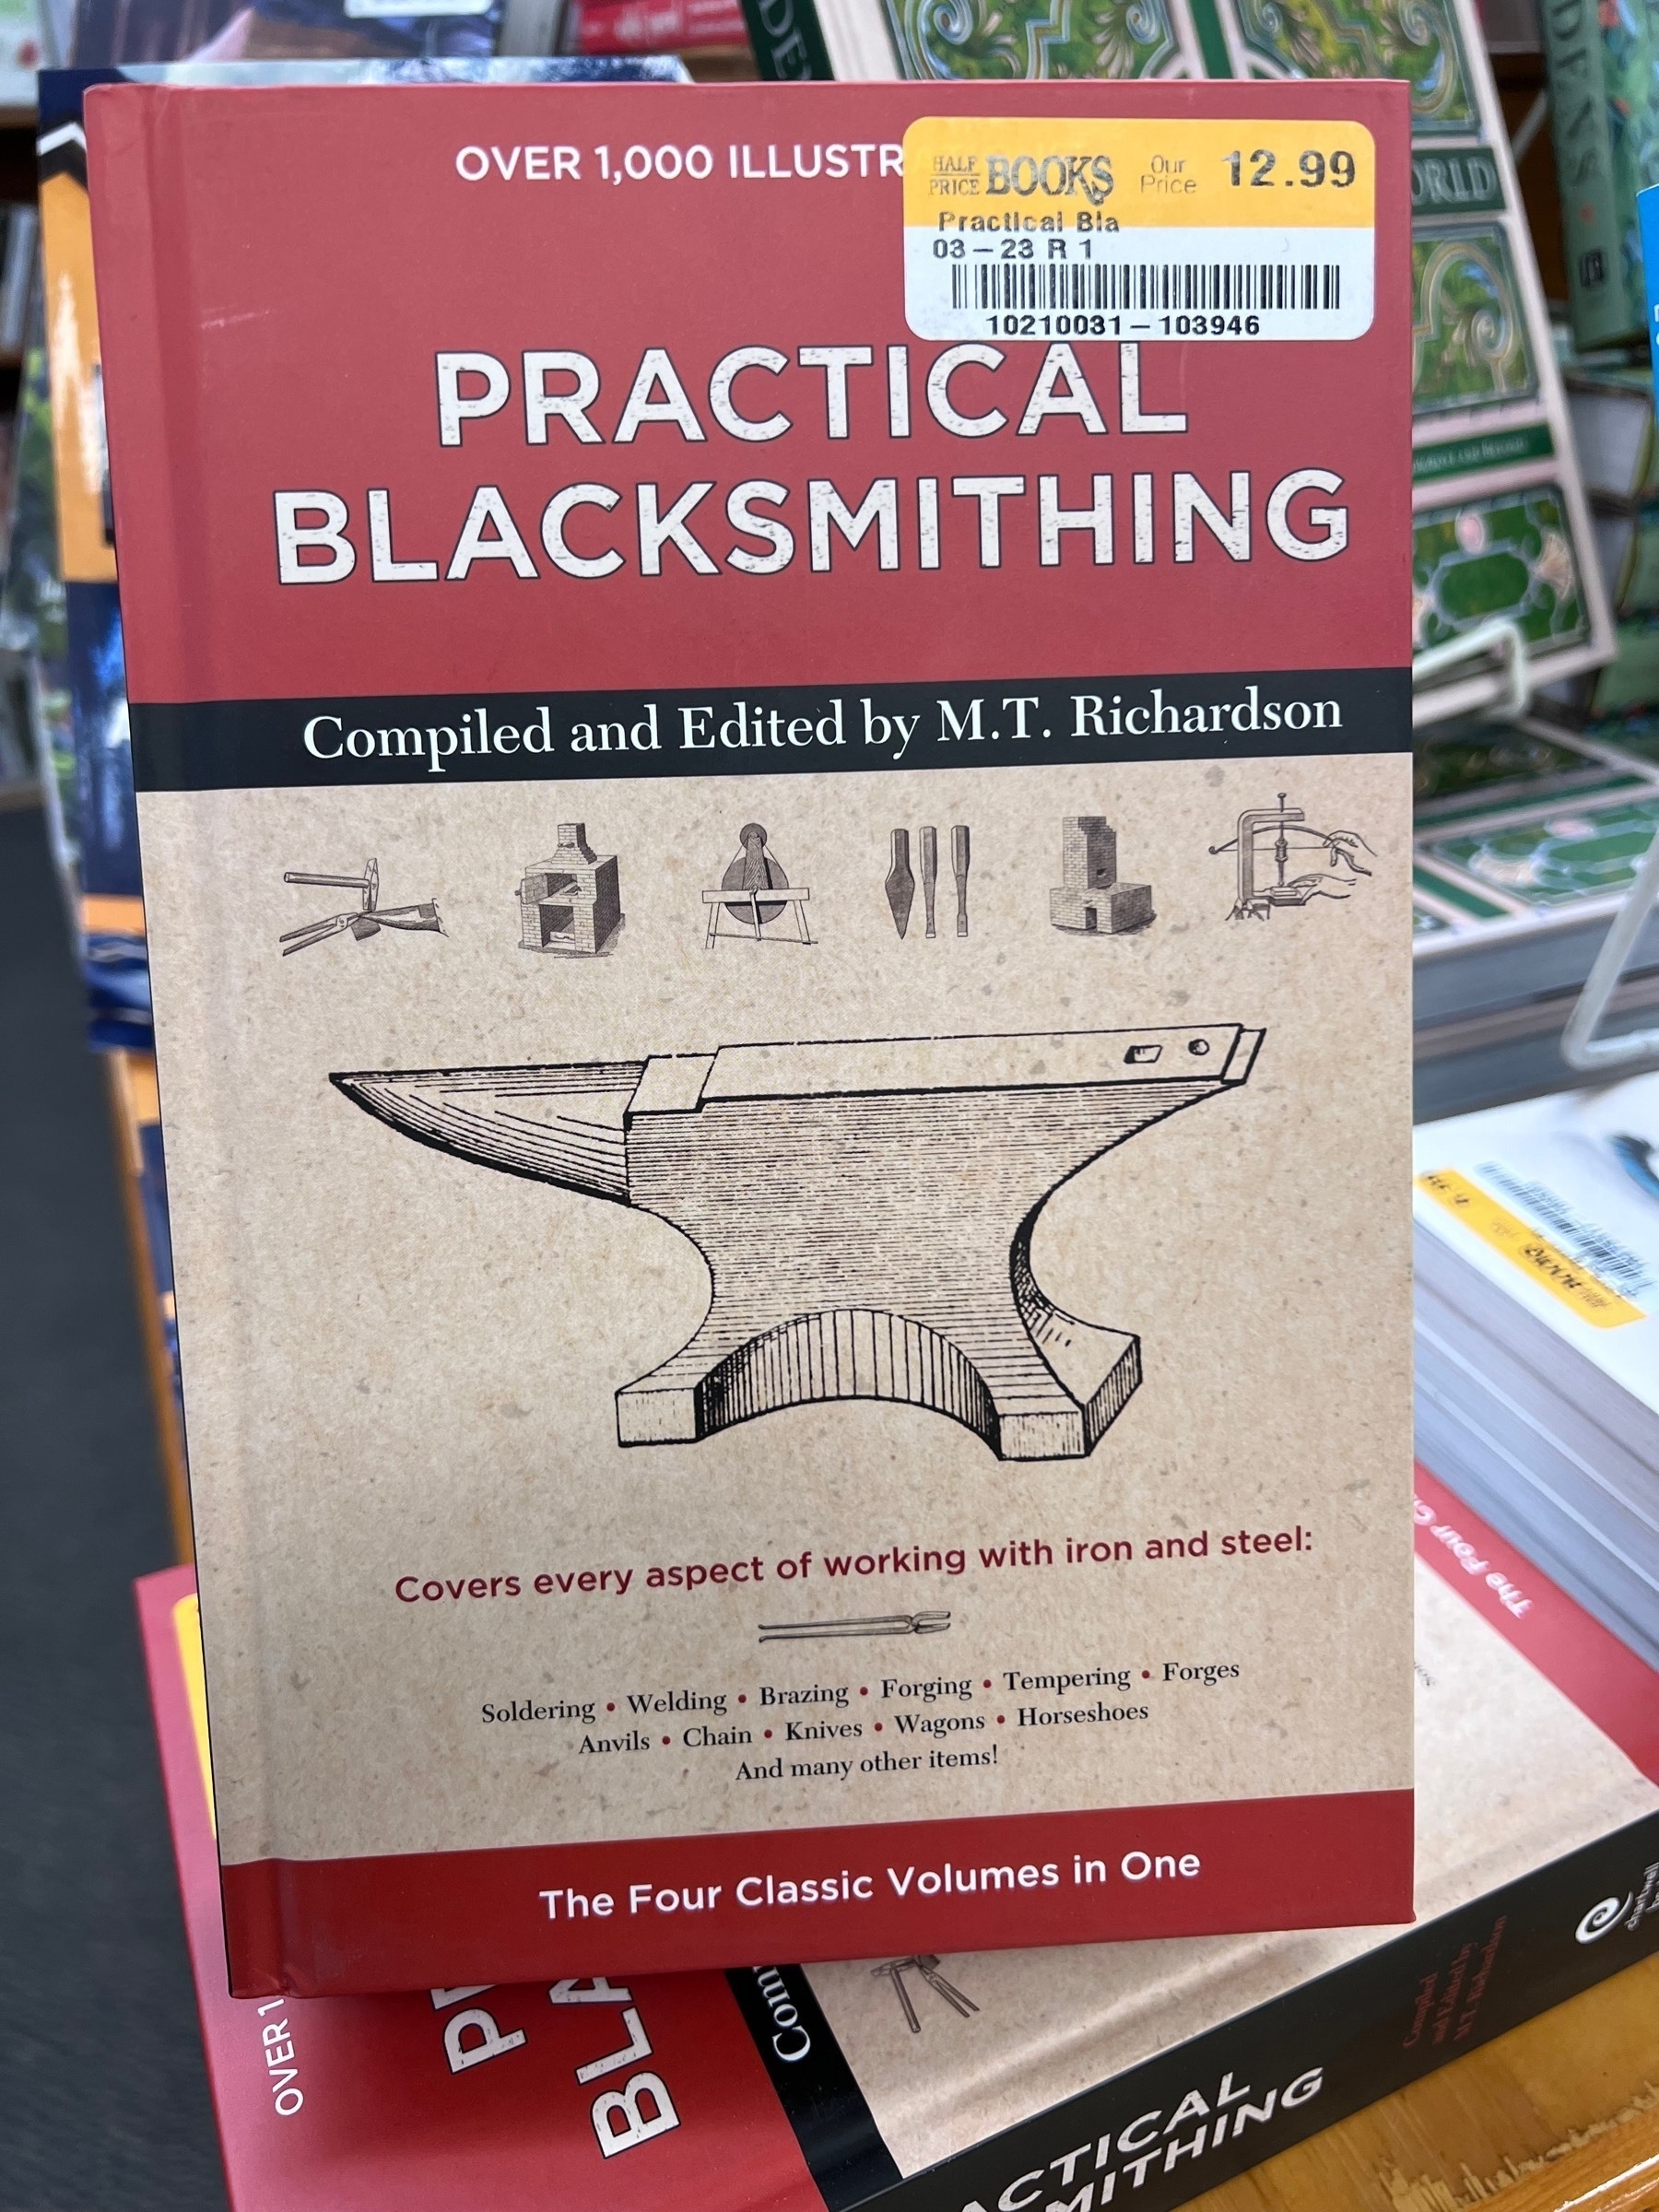 Photo of a book called "Practical Blacksmithing"